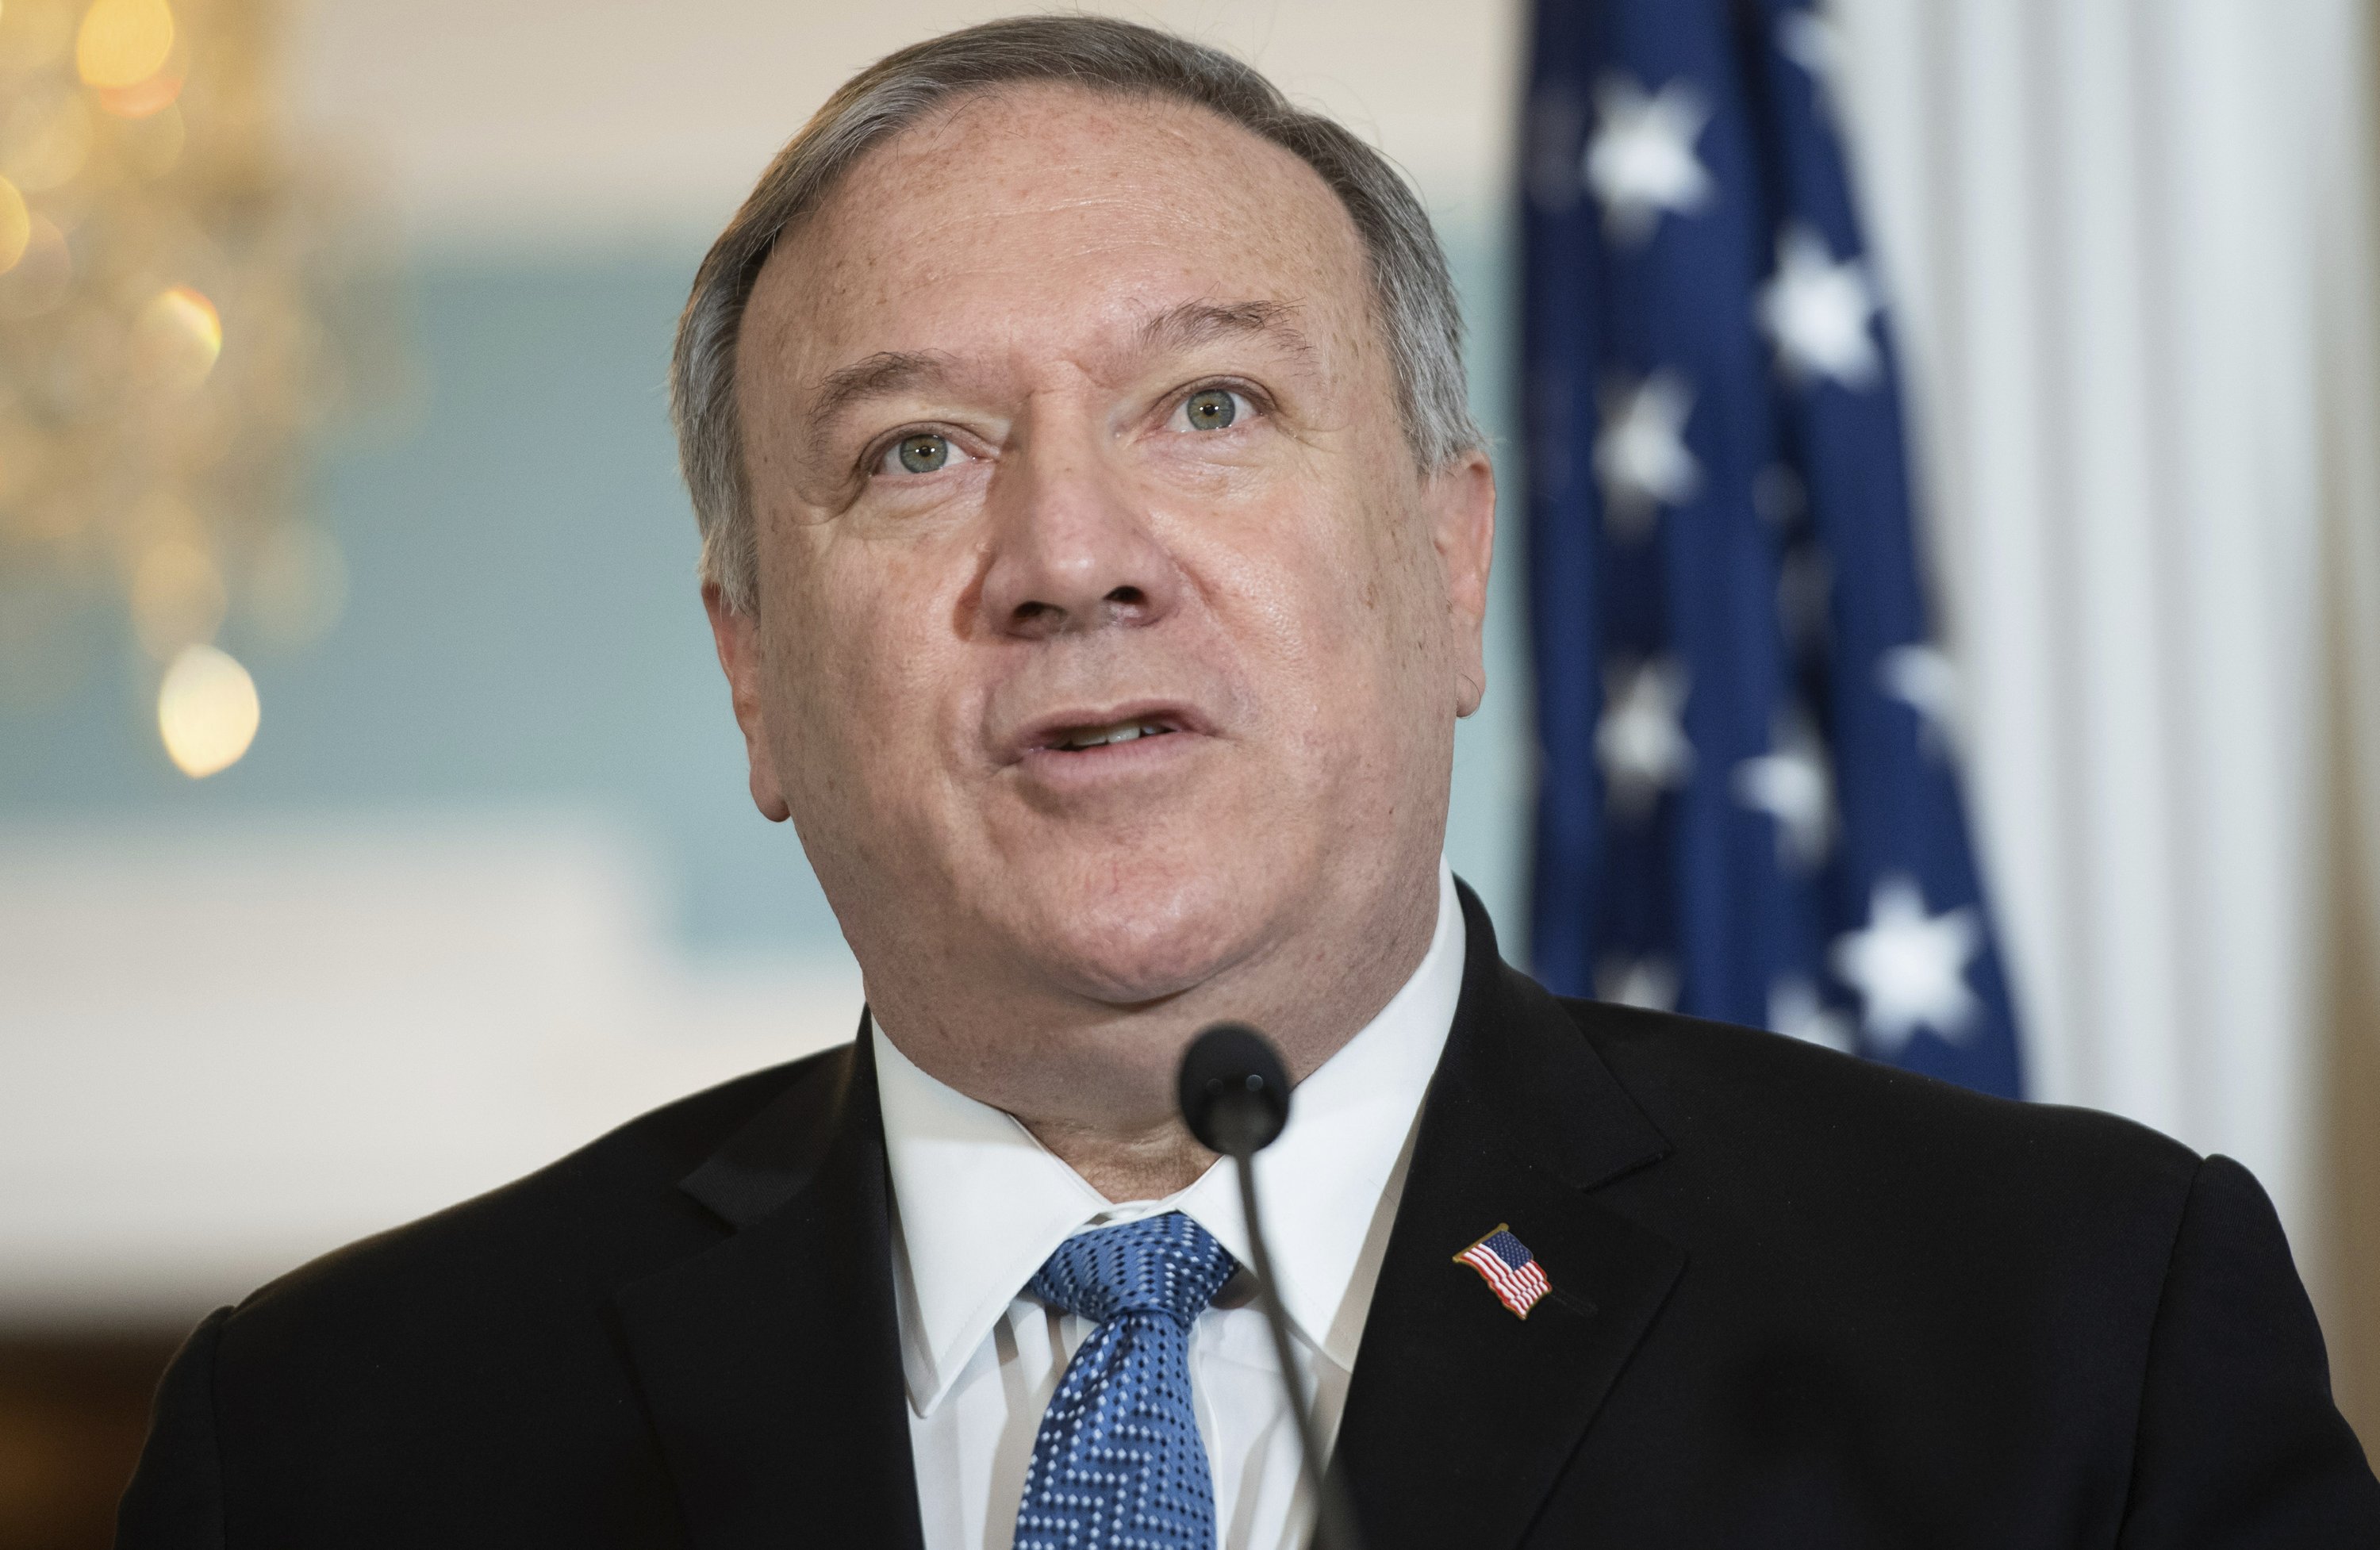 Yemen, China and Cuba top Pompeo’s to-do list over time